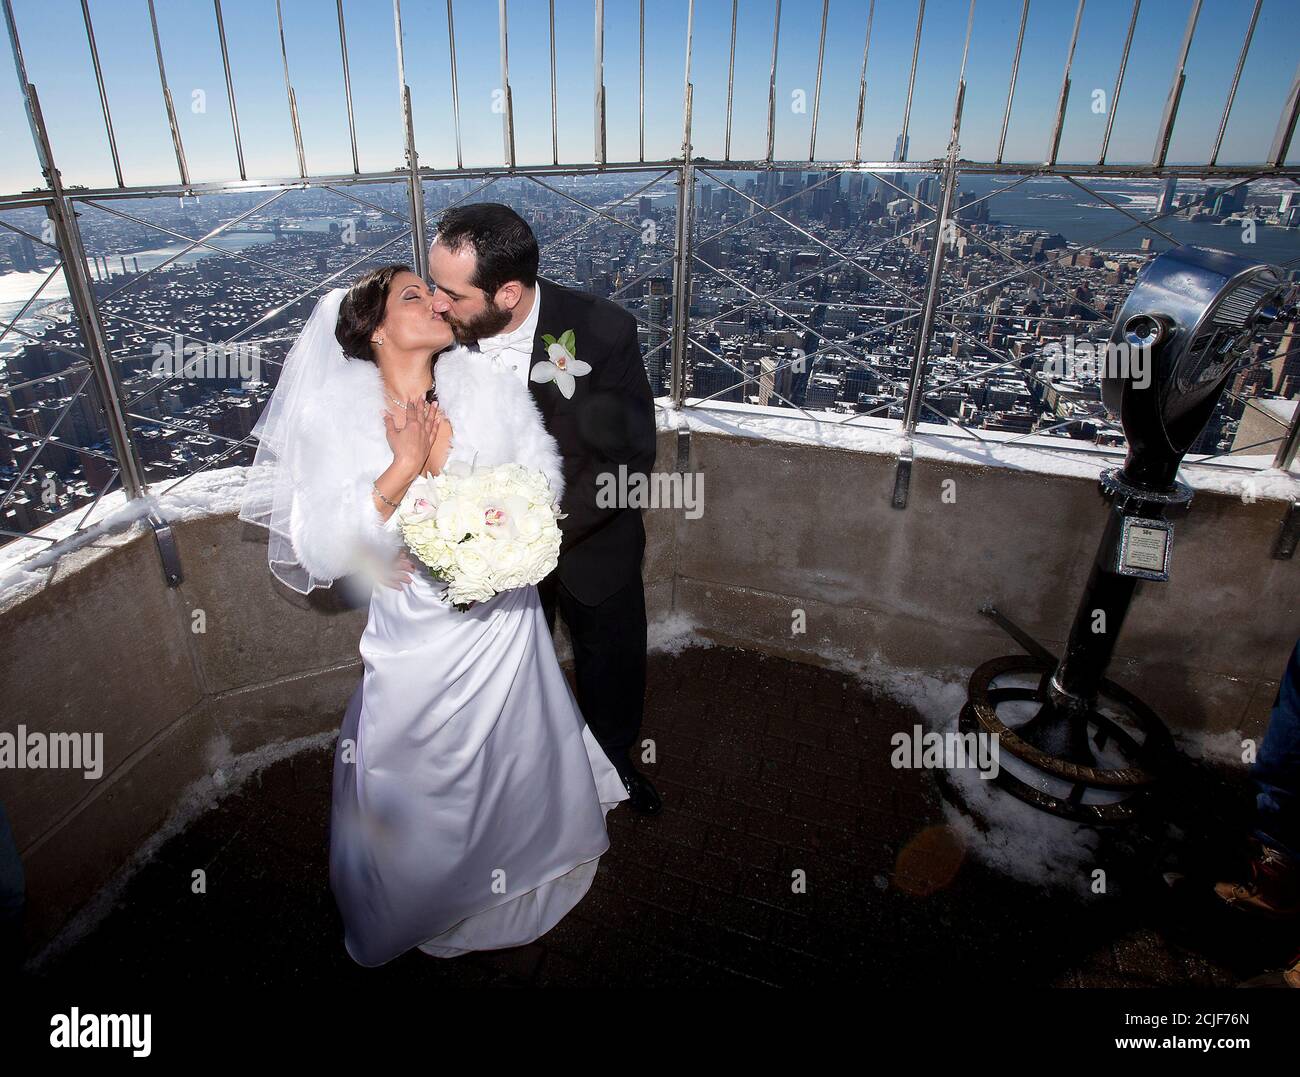 Maria Vasquez and Brendan Goldblatt kiss on the top of the Empire State  Building after getting married in the Manhattan borough of New York  February 14, 2014. The Empire State Building traditionally